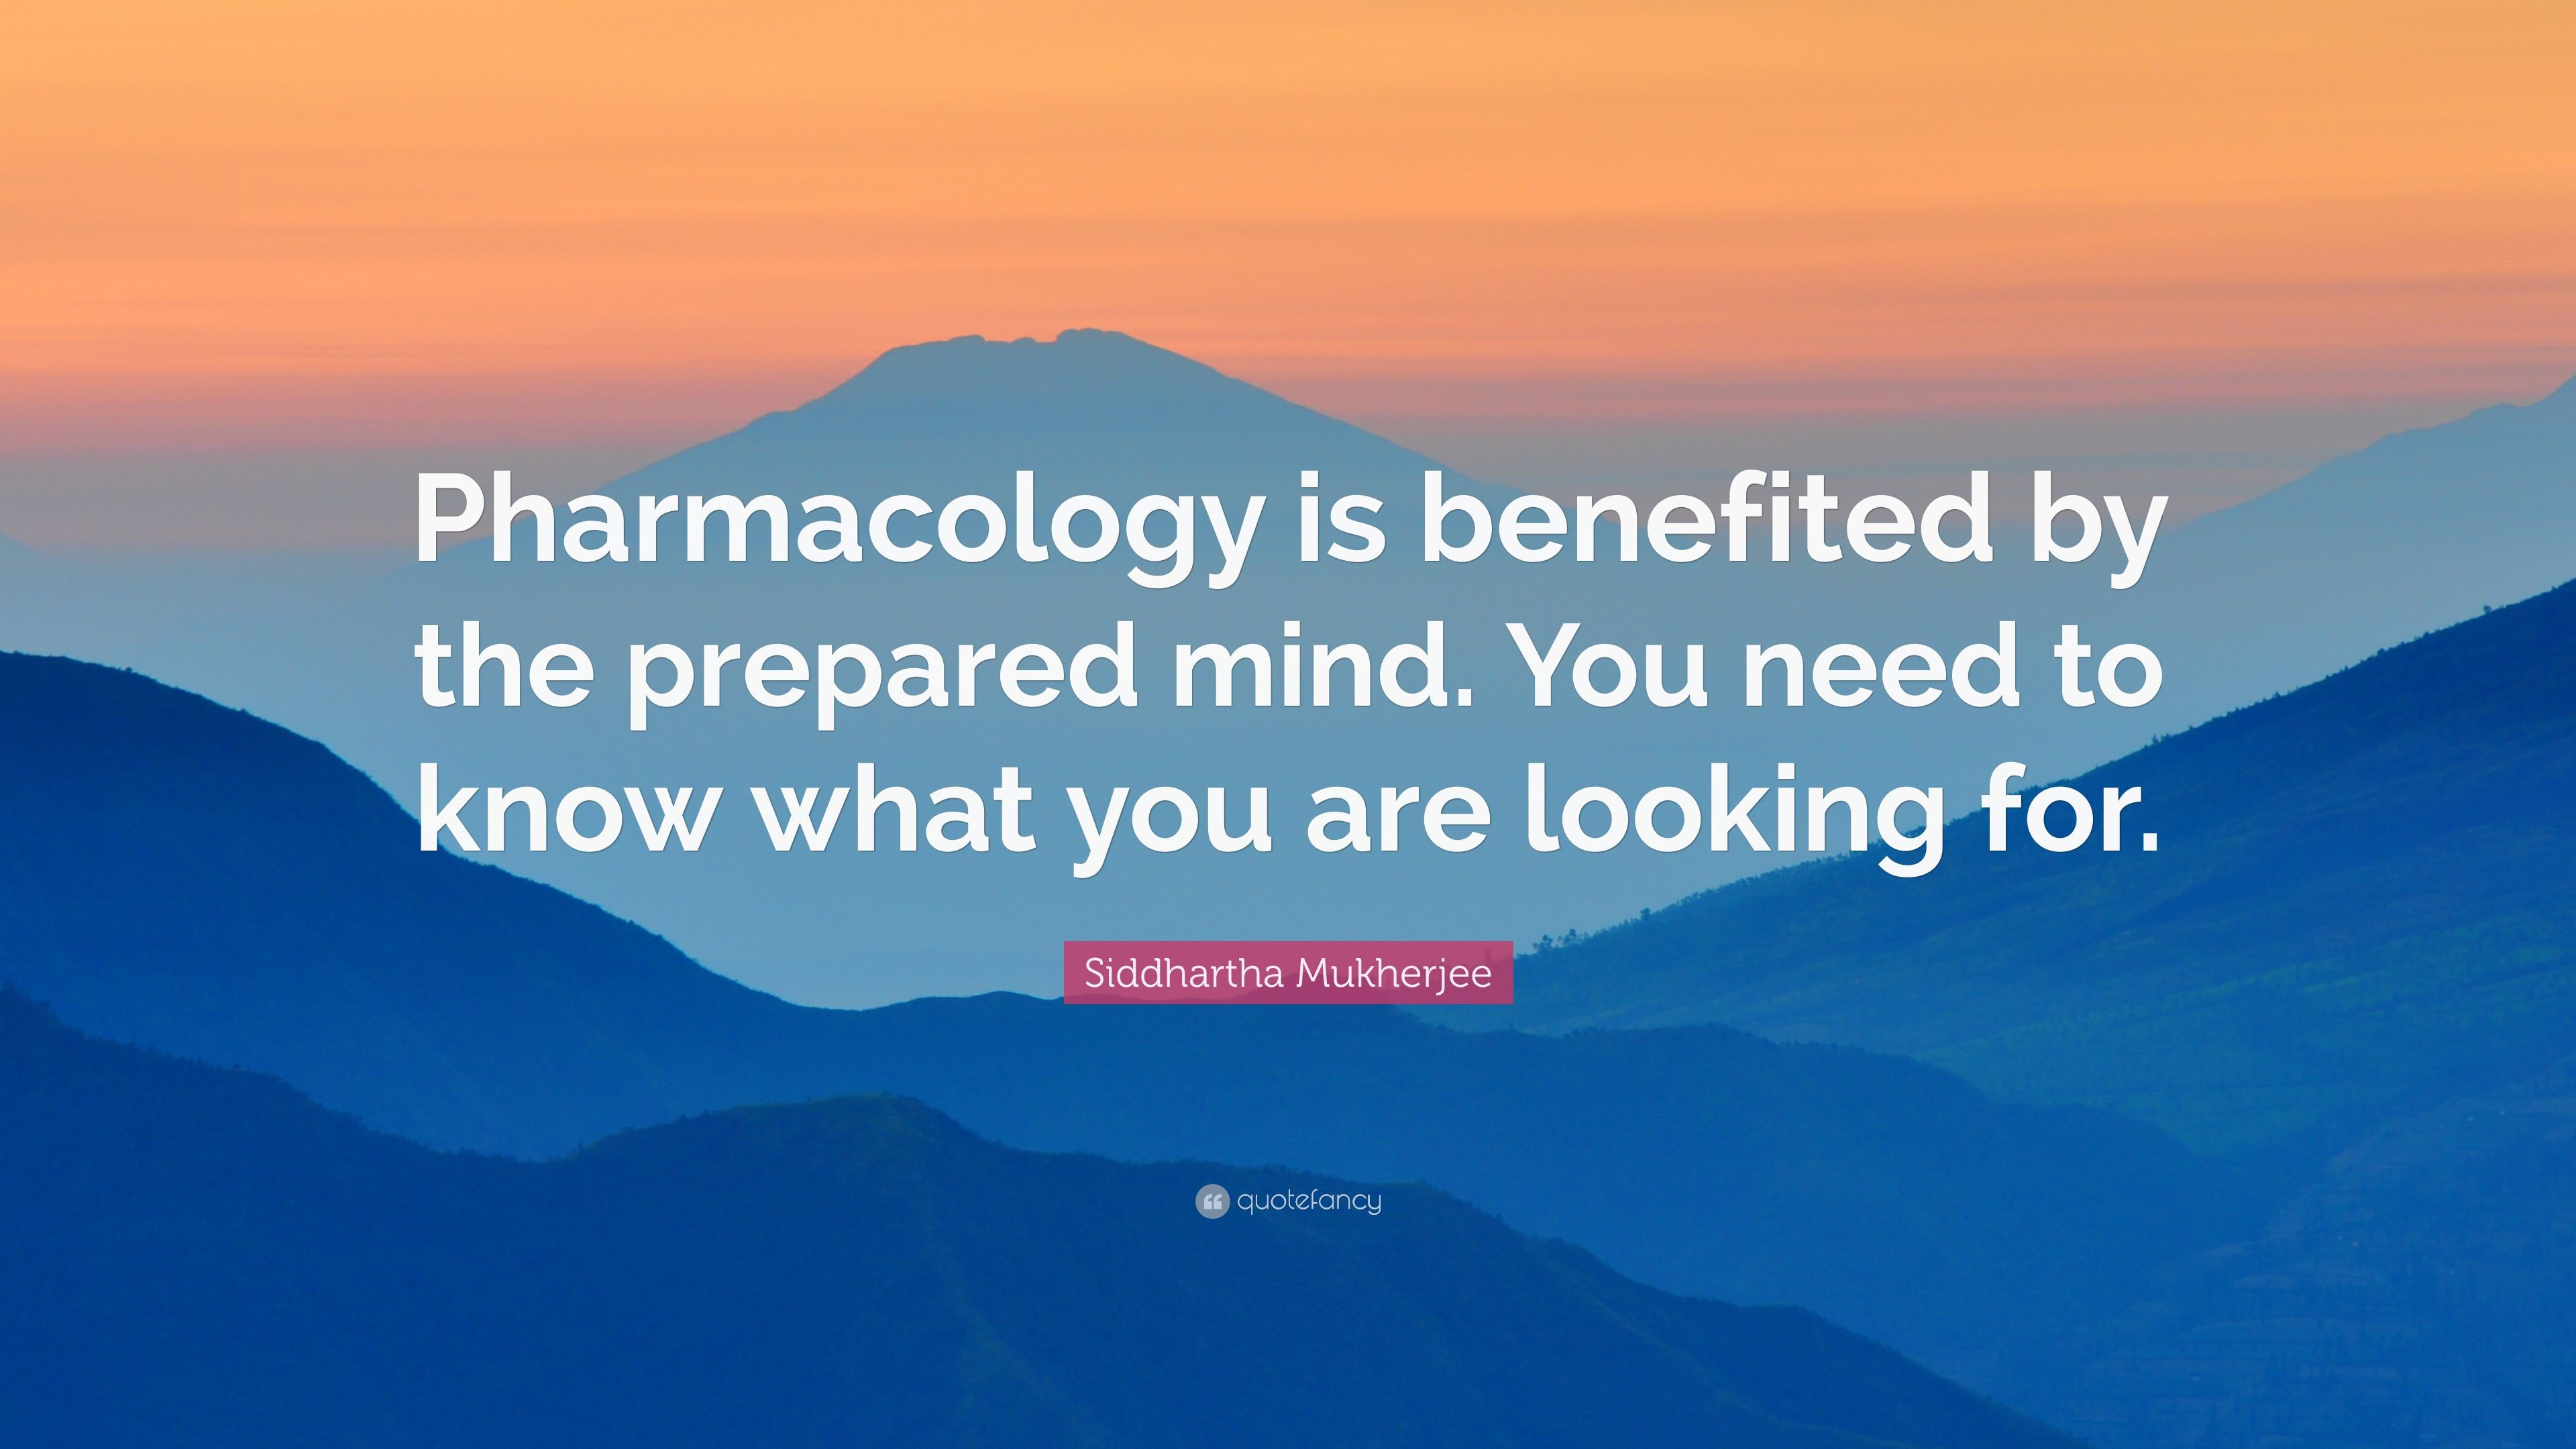 Siddhartha Mukherjee Quote: “Pharmacology is benefited by the prepared mind. You need to know what you are looking for.” (7 wallpaper)